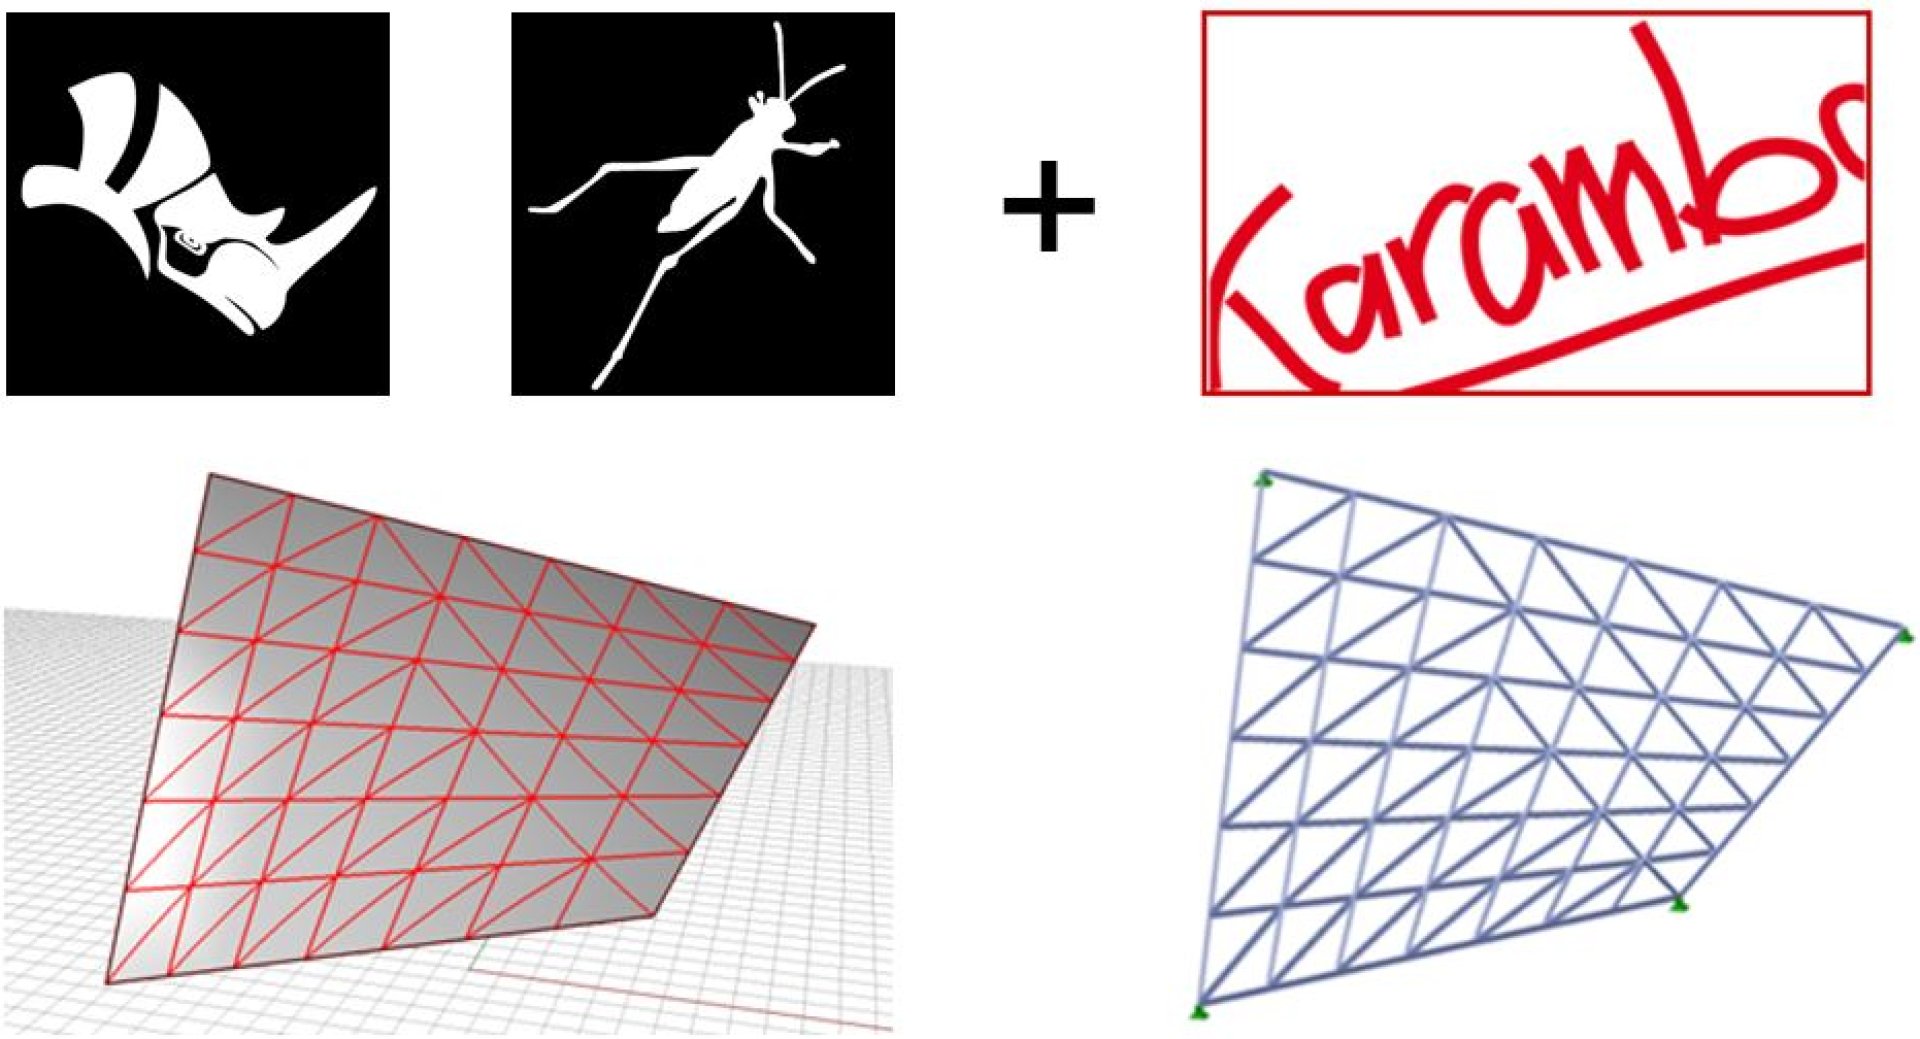 Karamba3D is a plug-in that can be embedded in the parametric environment of Grasshopper3D in Rhinoceros3D